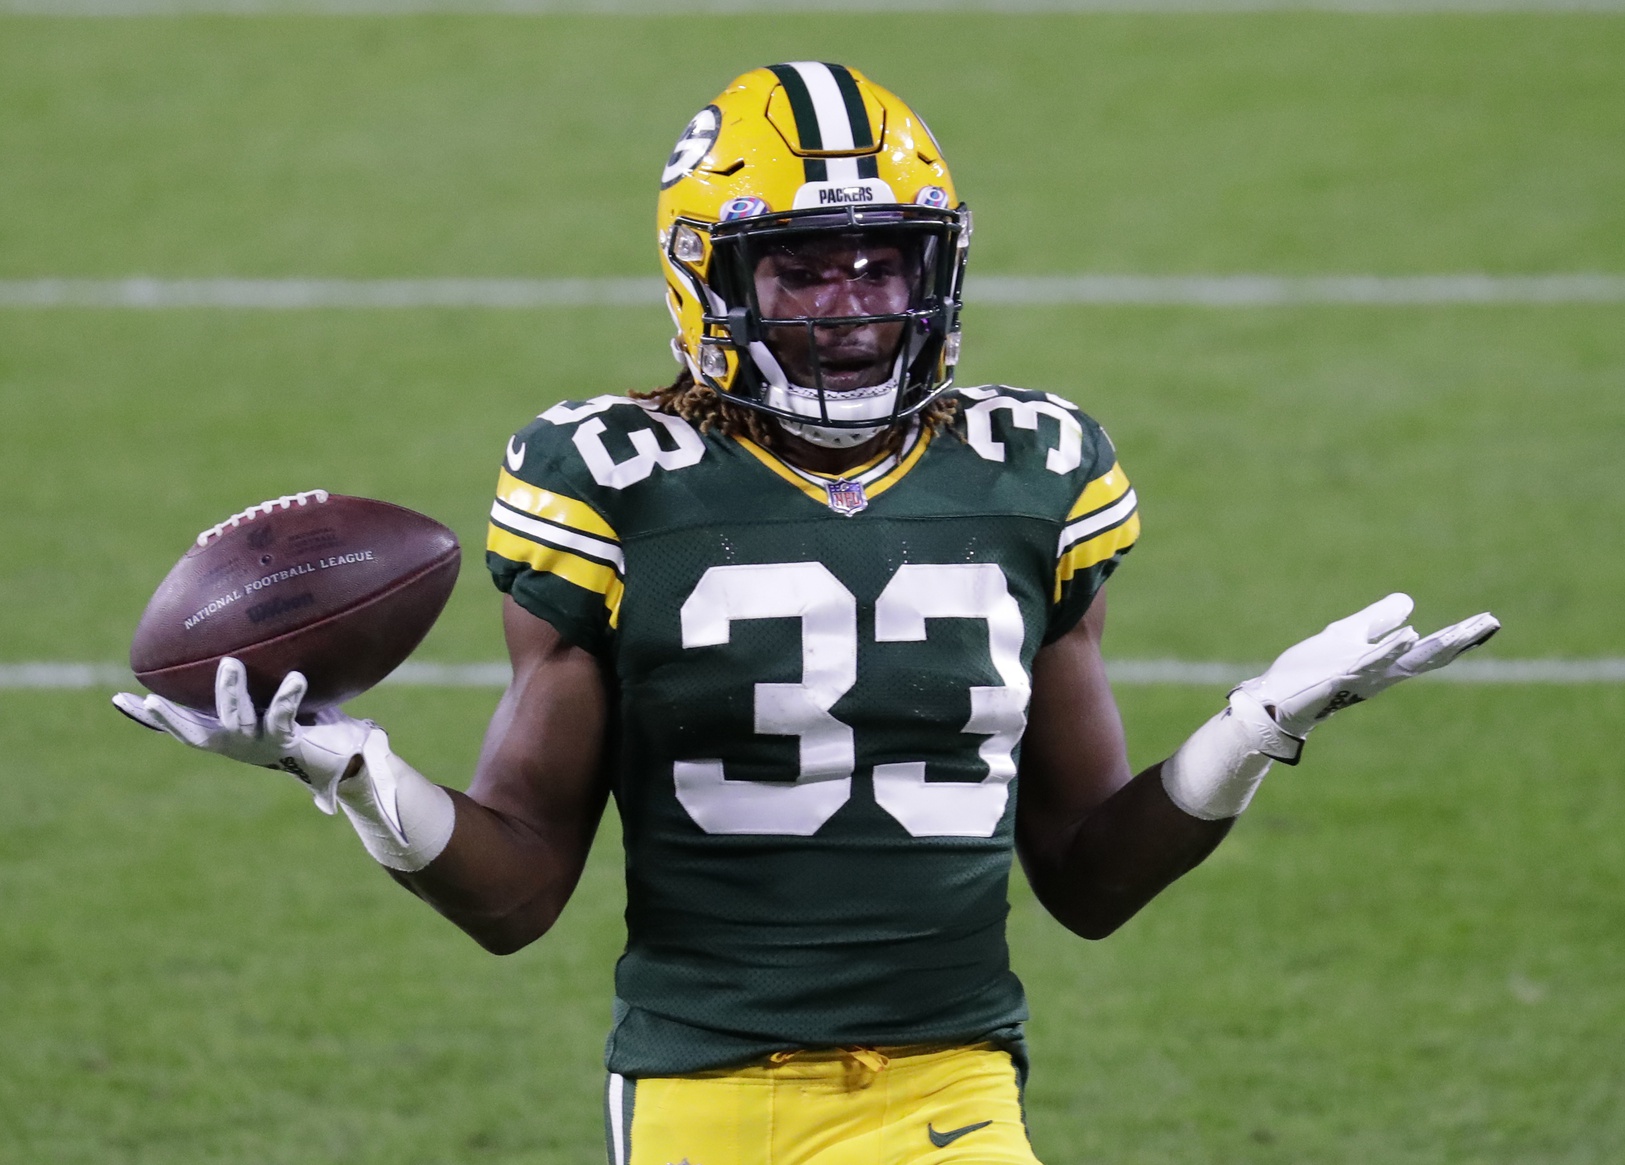 Aaron Jones, playing for his father who died of COVID-19 complications, has  huge night in Packers win